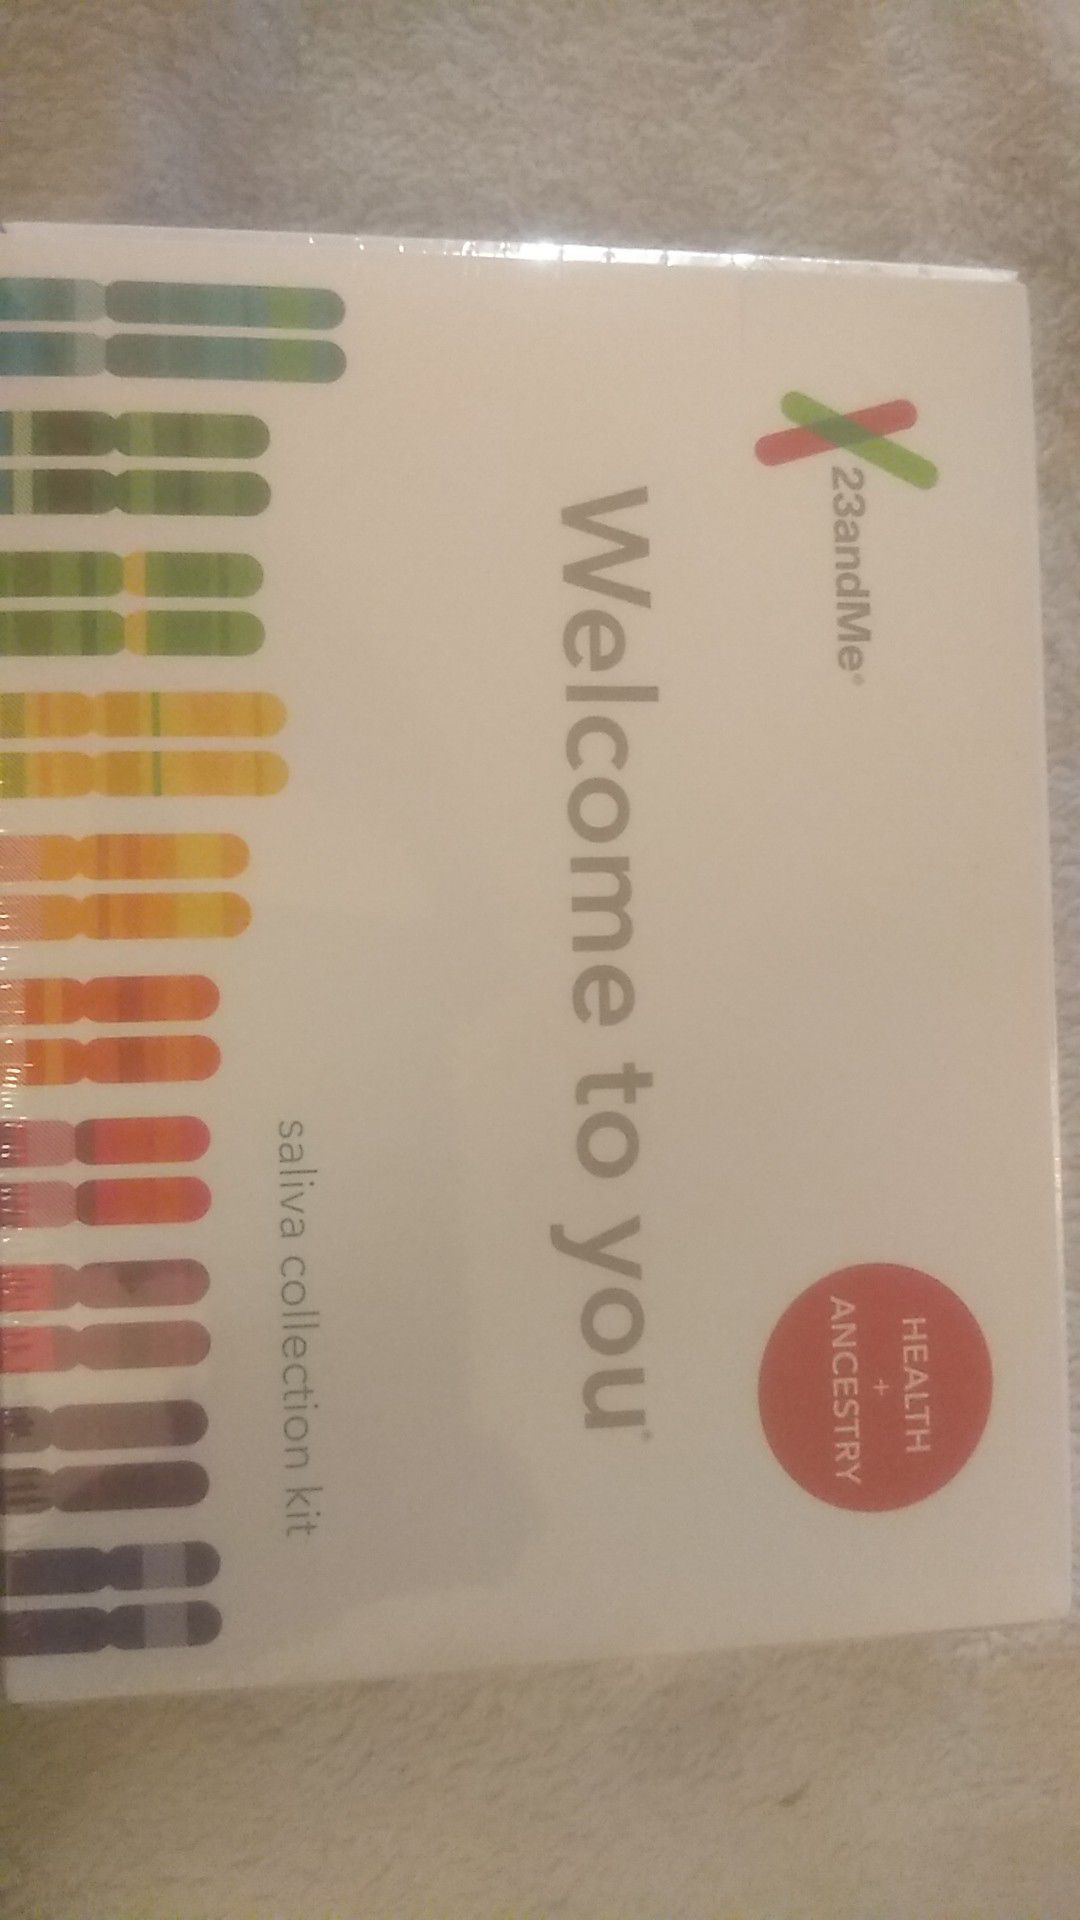 23 and me health + ancestry